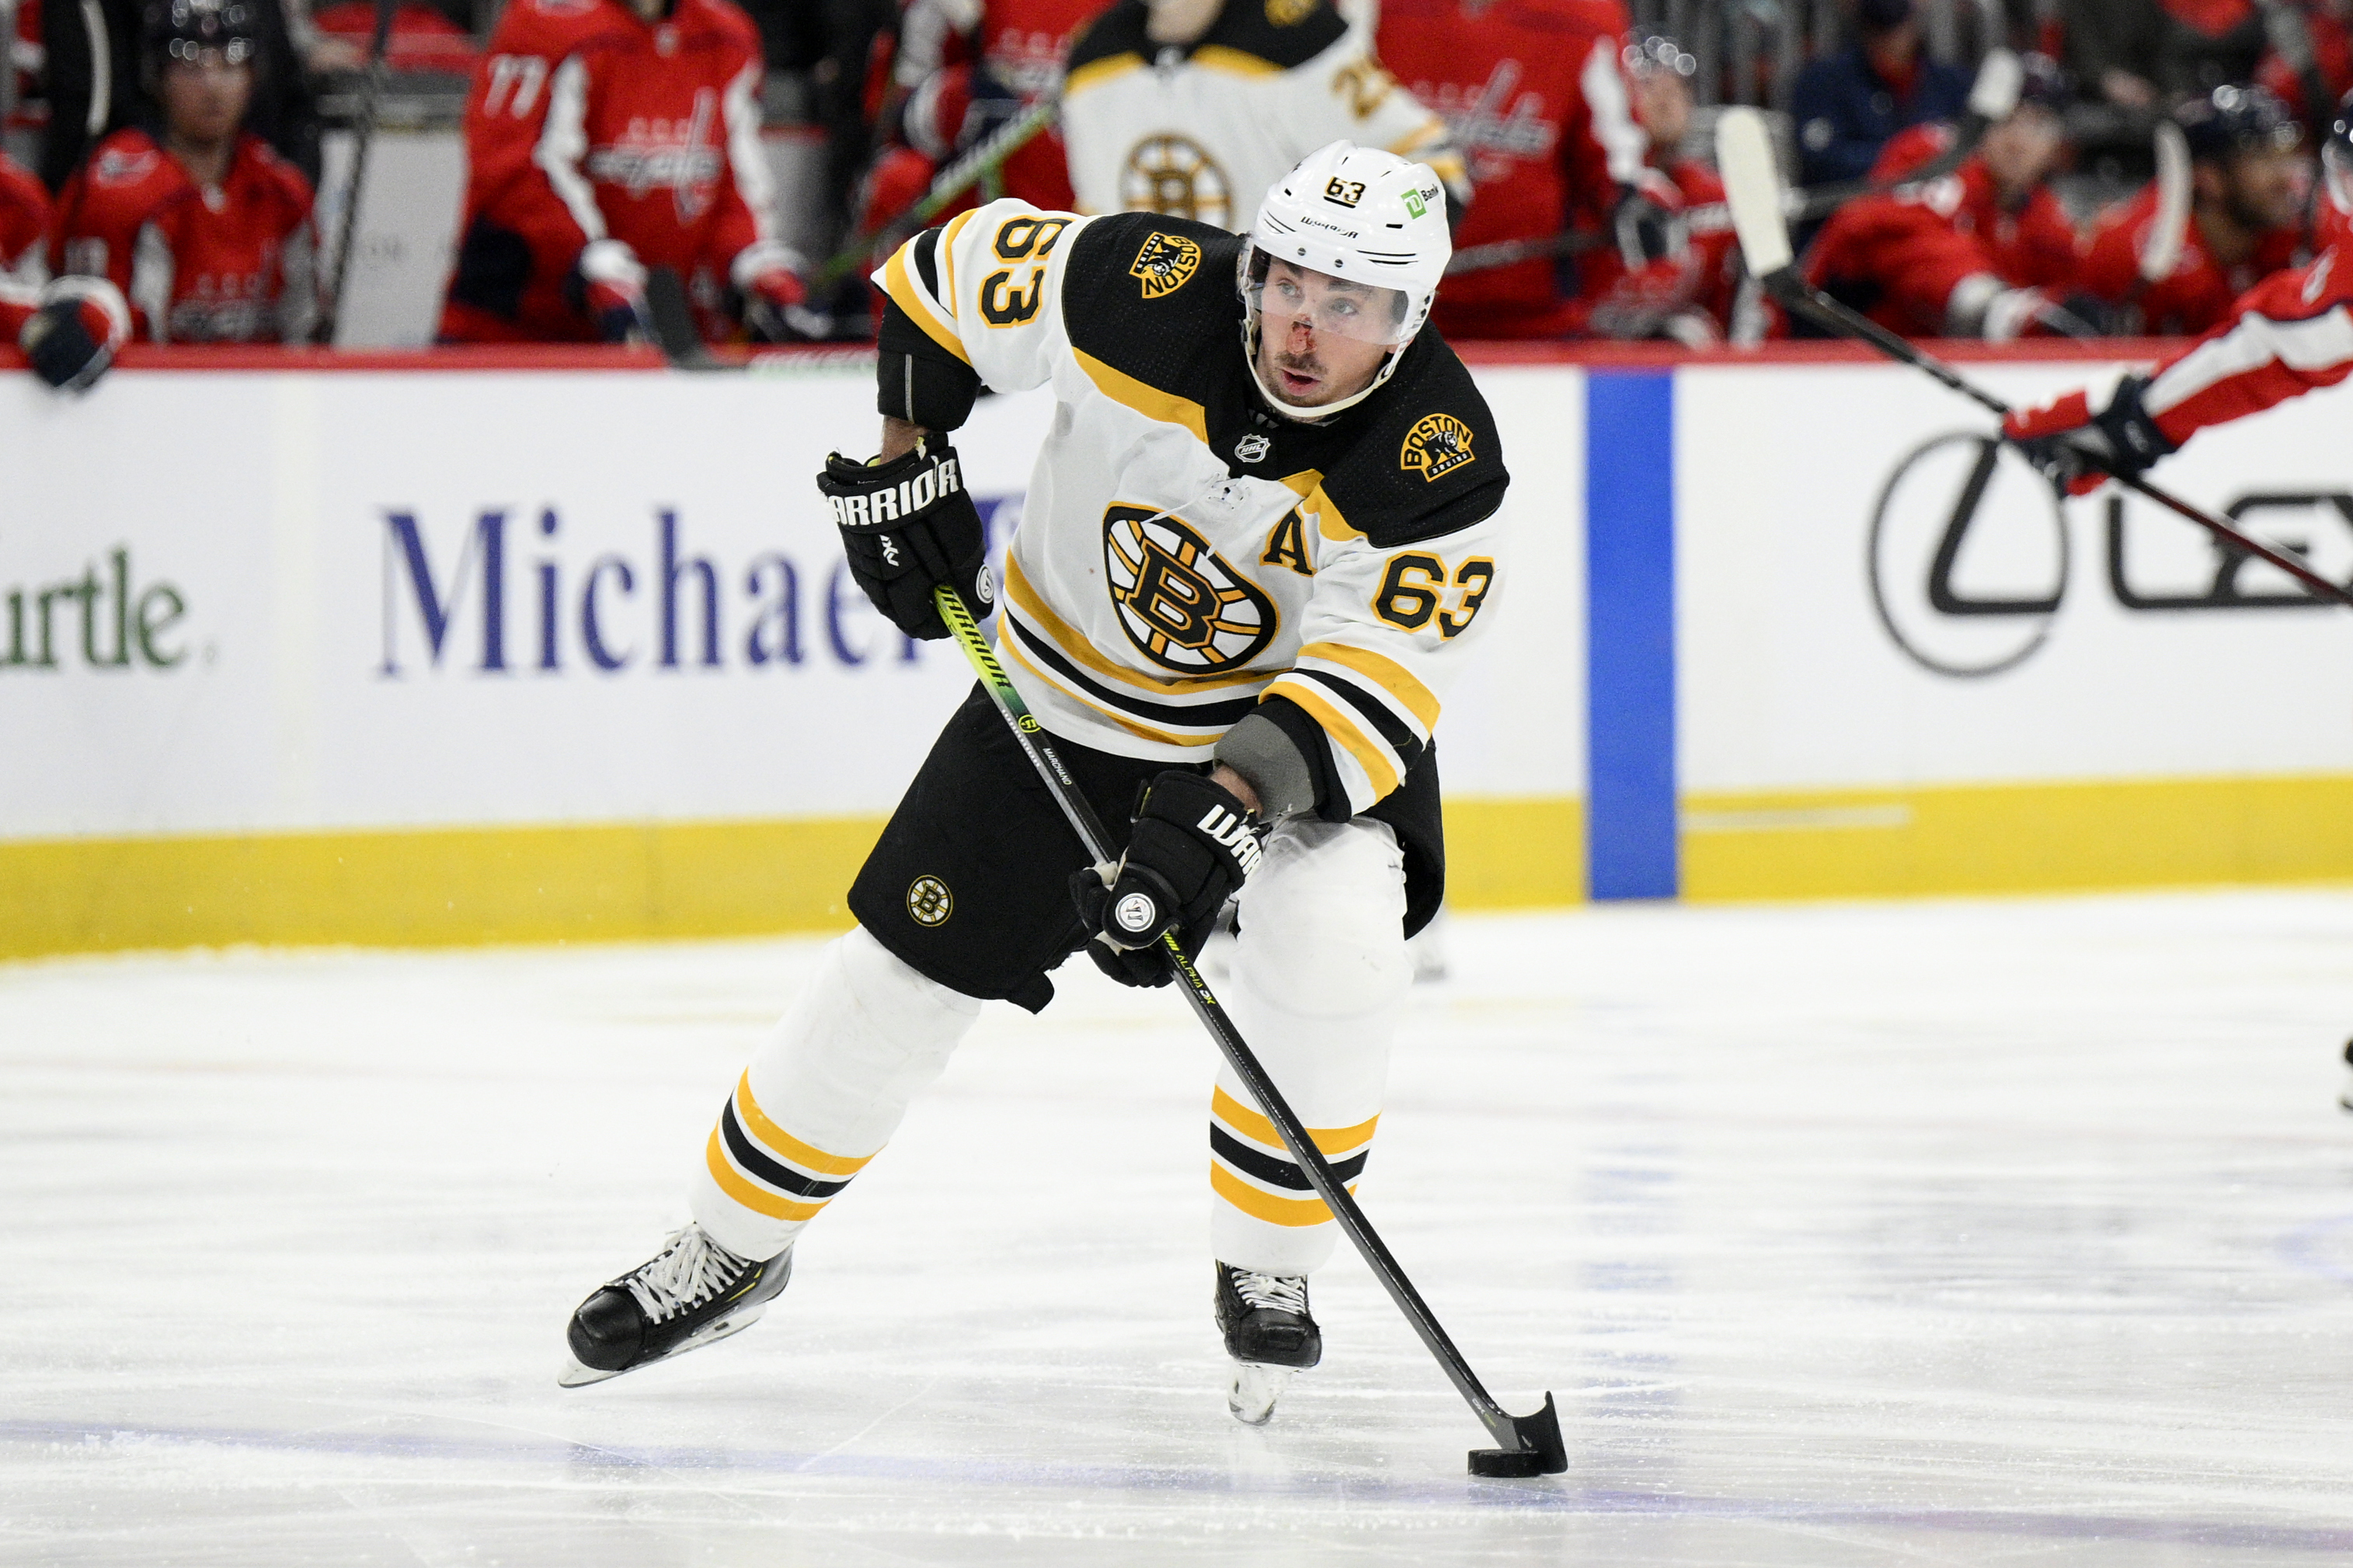 NHL referee takes out Bruins' Brad Marchand with surprise check in bizarre  moment